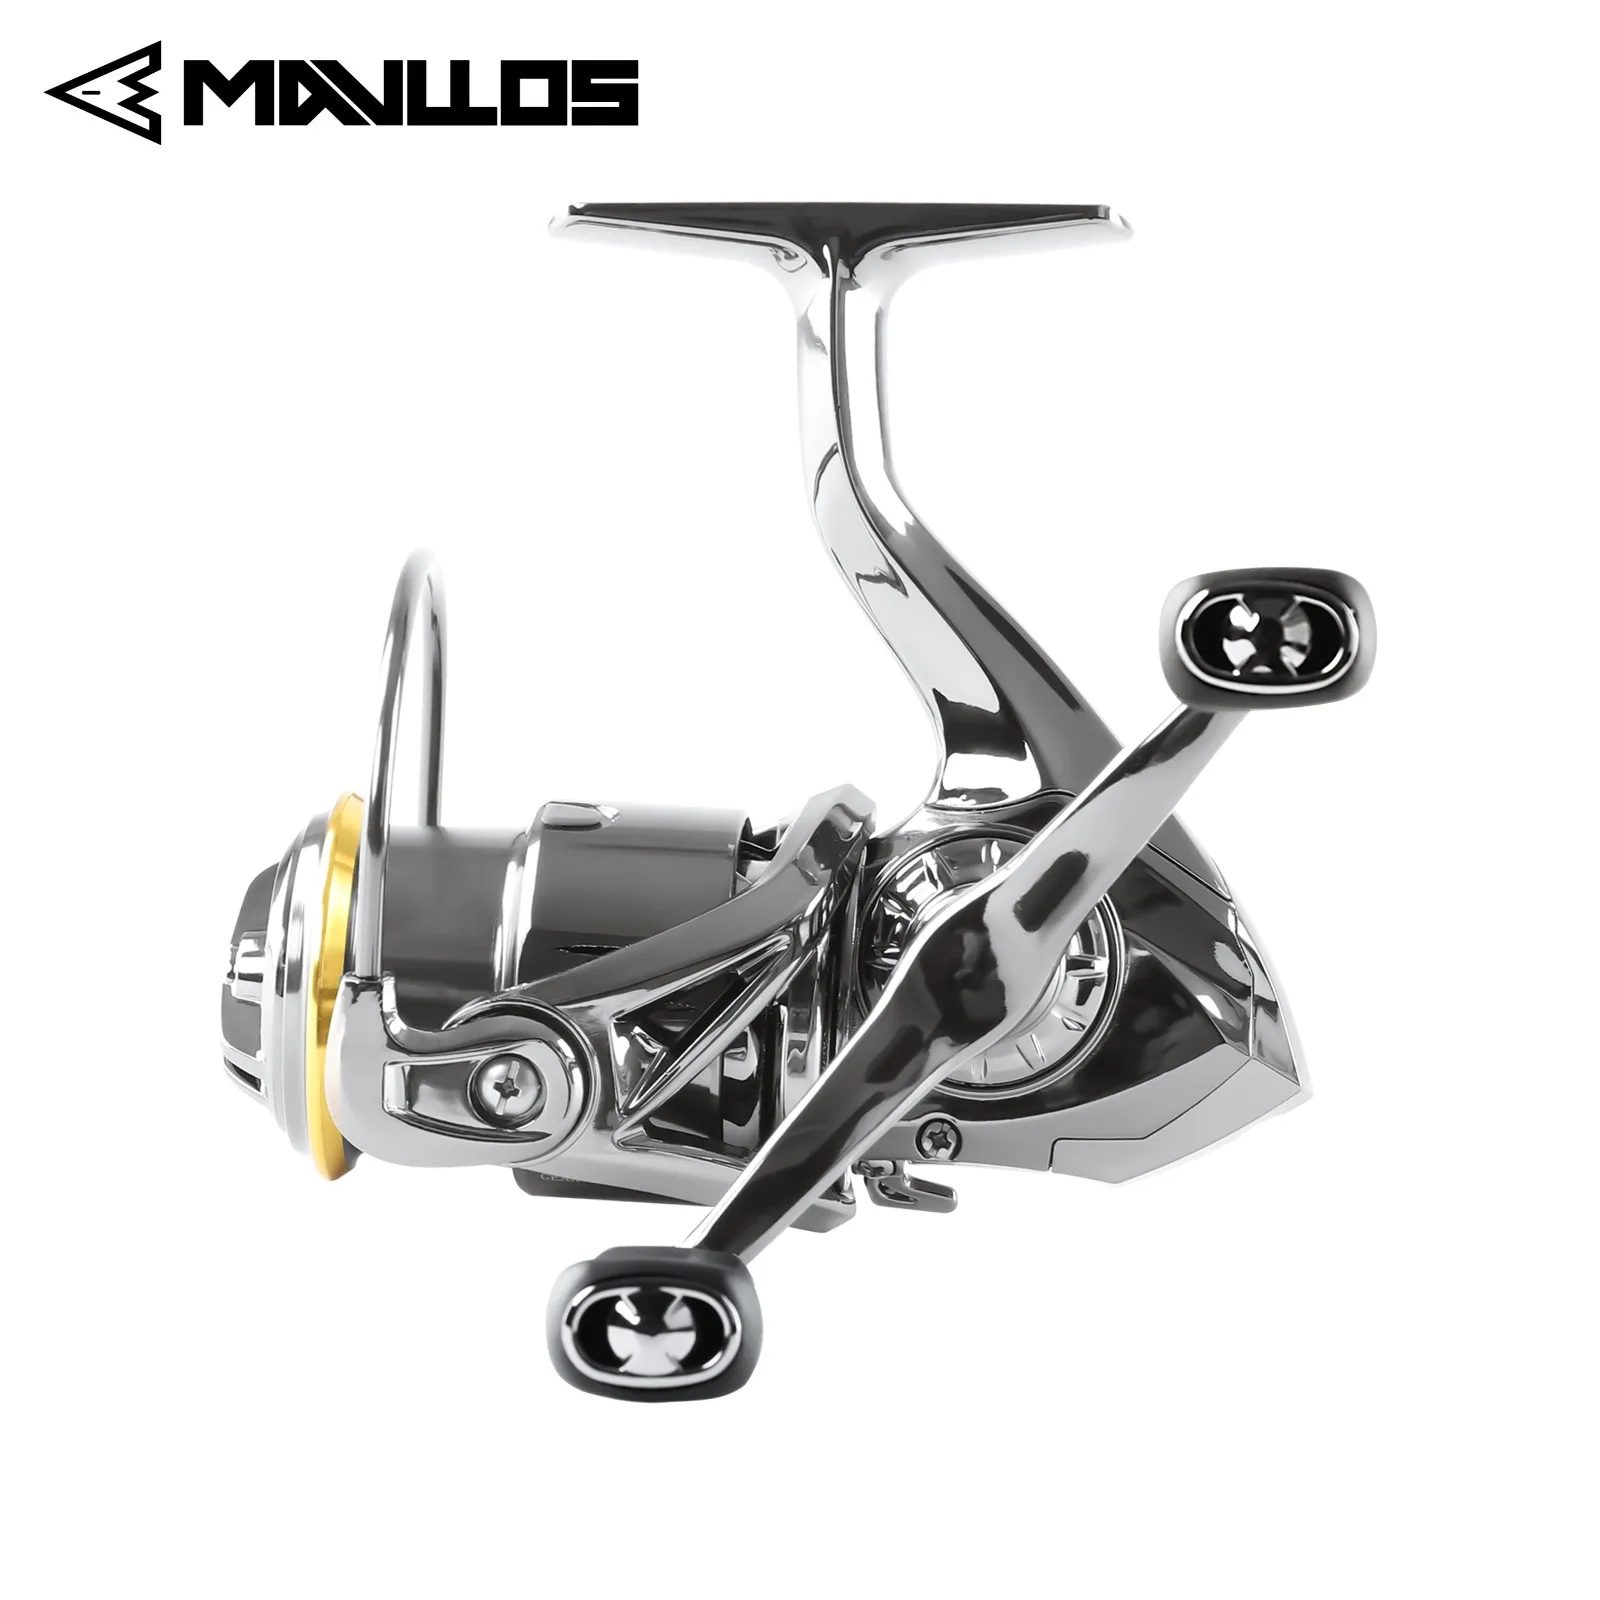 

Mavllos Carp Fishing Reel With Shallow Spool Ratio 5.2:1 Drag Power 12kg Left Right Hand Saltwater Bass Fishing Spinning Reel